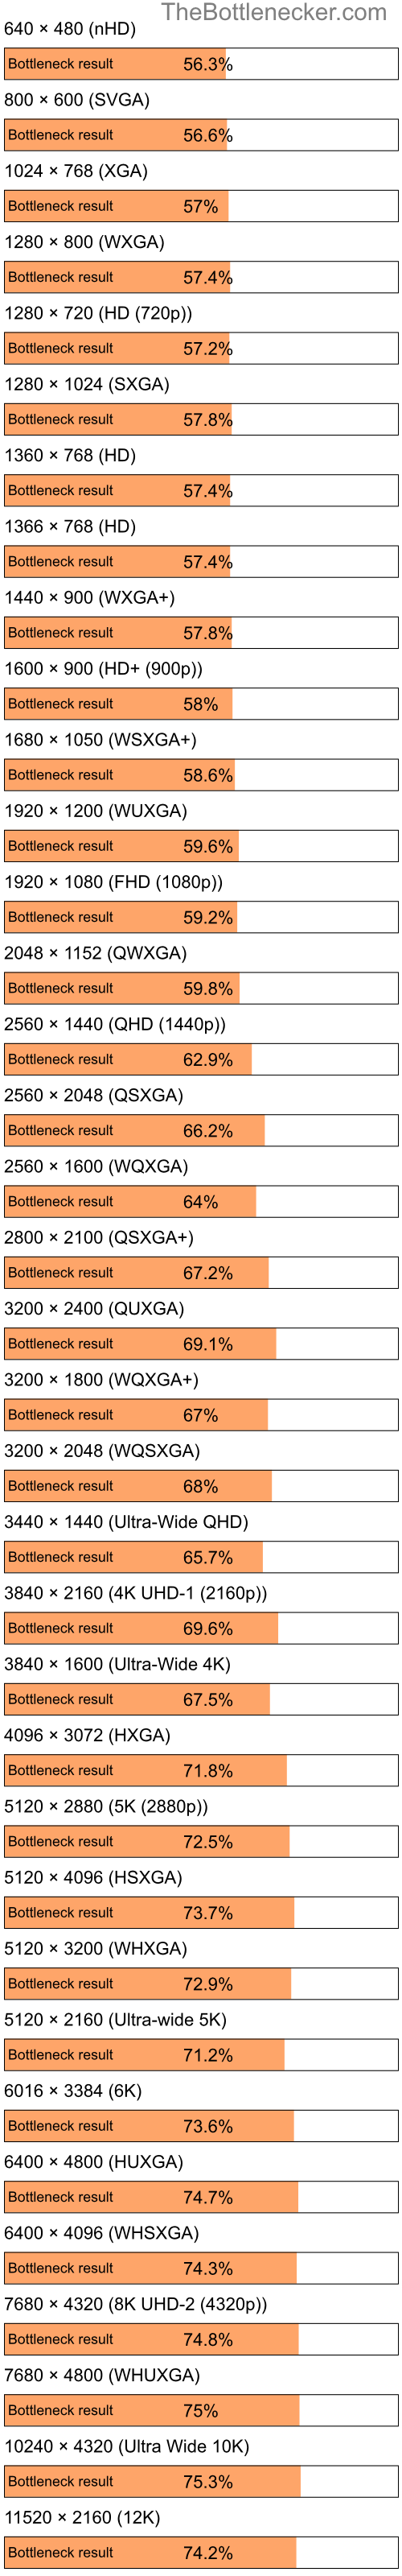 Bottleneck results by resolution for Intel Pentium 4 and NVIDIA GeForce 9300M GS in Processor Intense Tasks